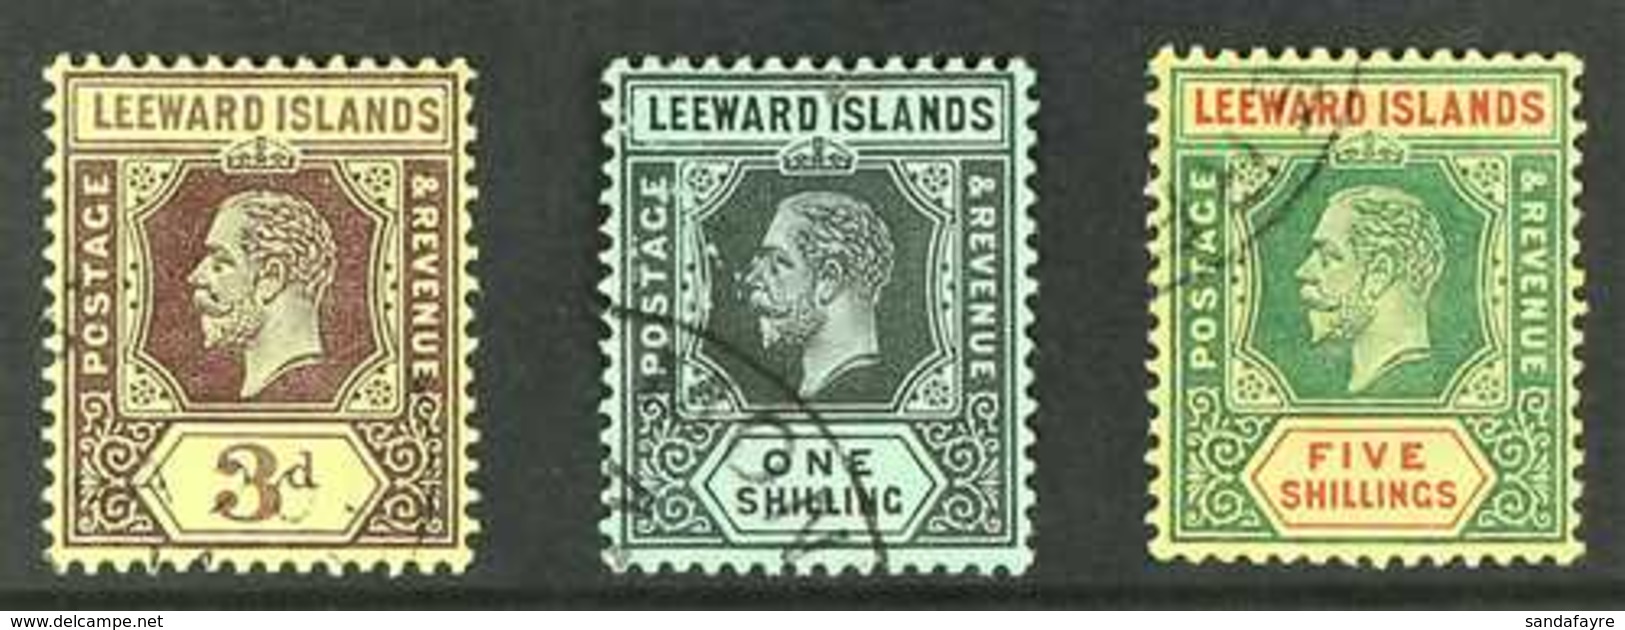 1912-22 3d, 1s And 5s White Backs, SG 51a, 54a, And 57a, Fine Correct Montserrat Cds Used. A Scarce Trio. (3 Stamps) For - Leeward  Islands